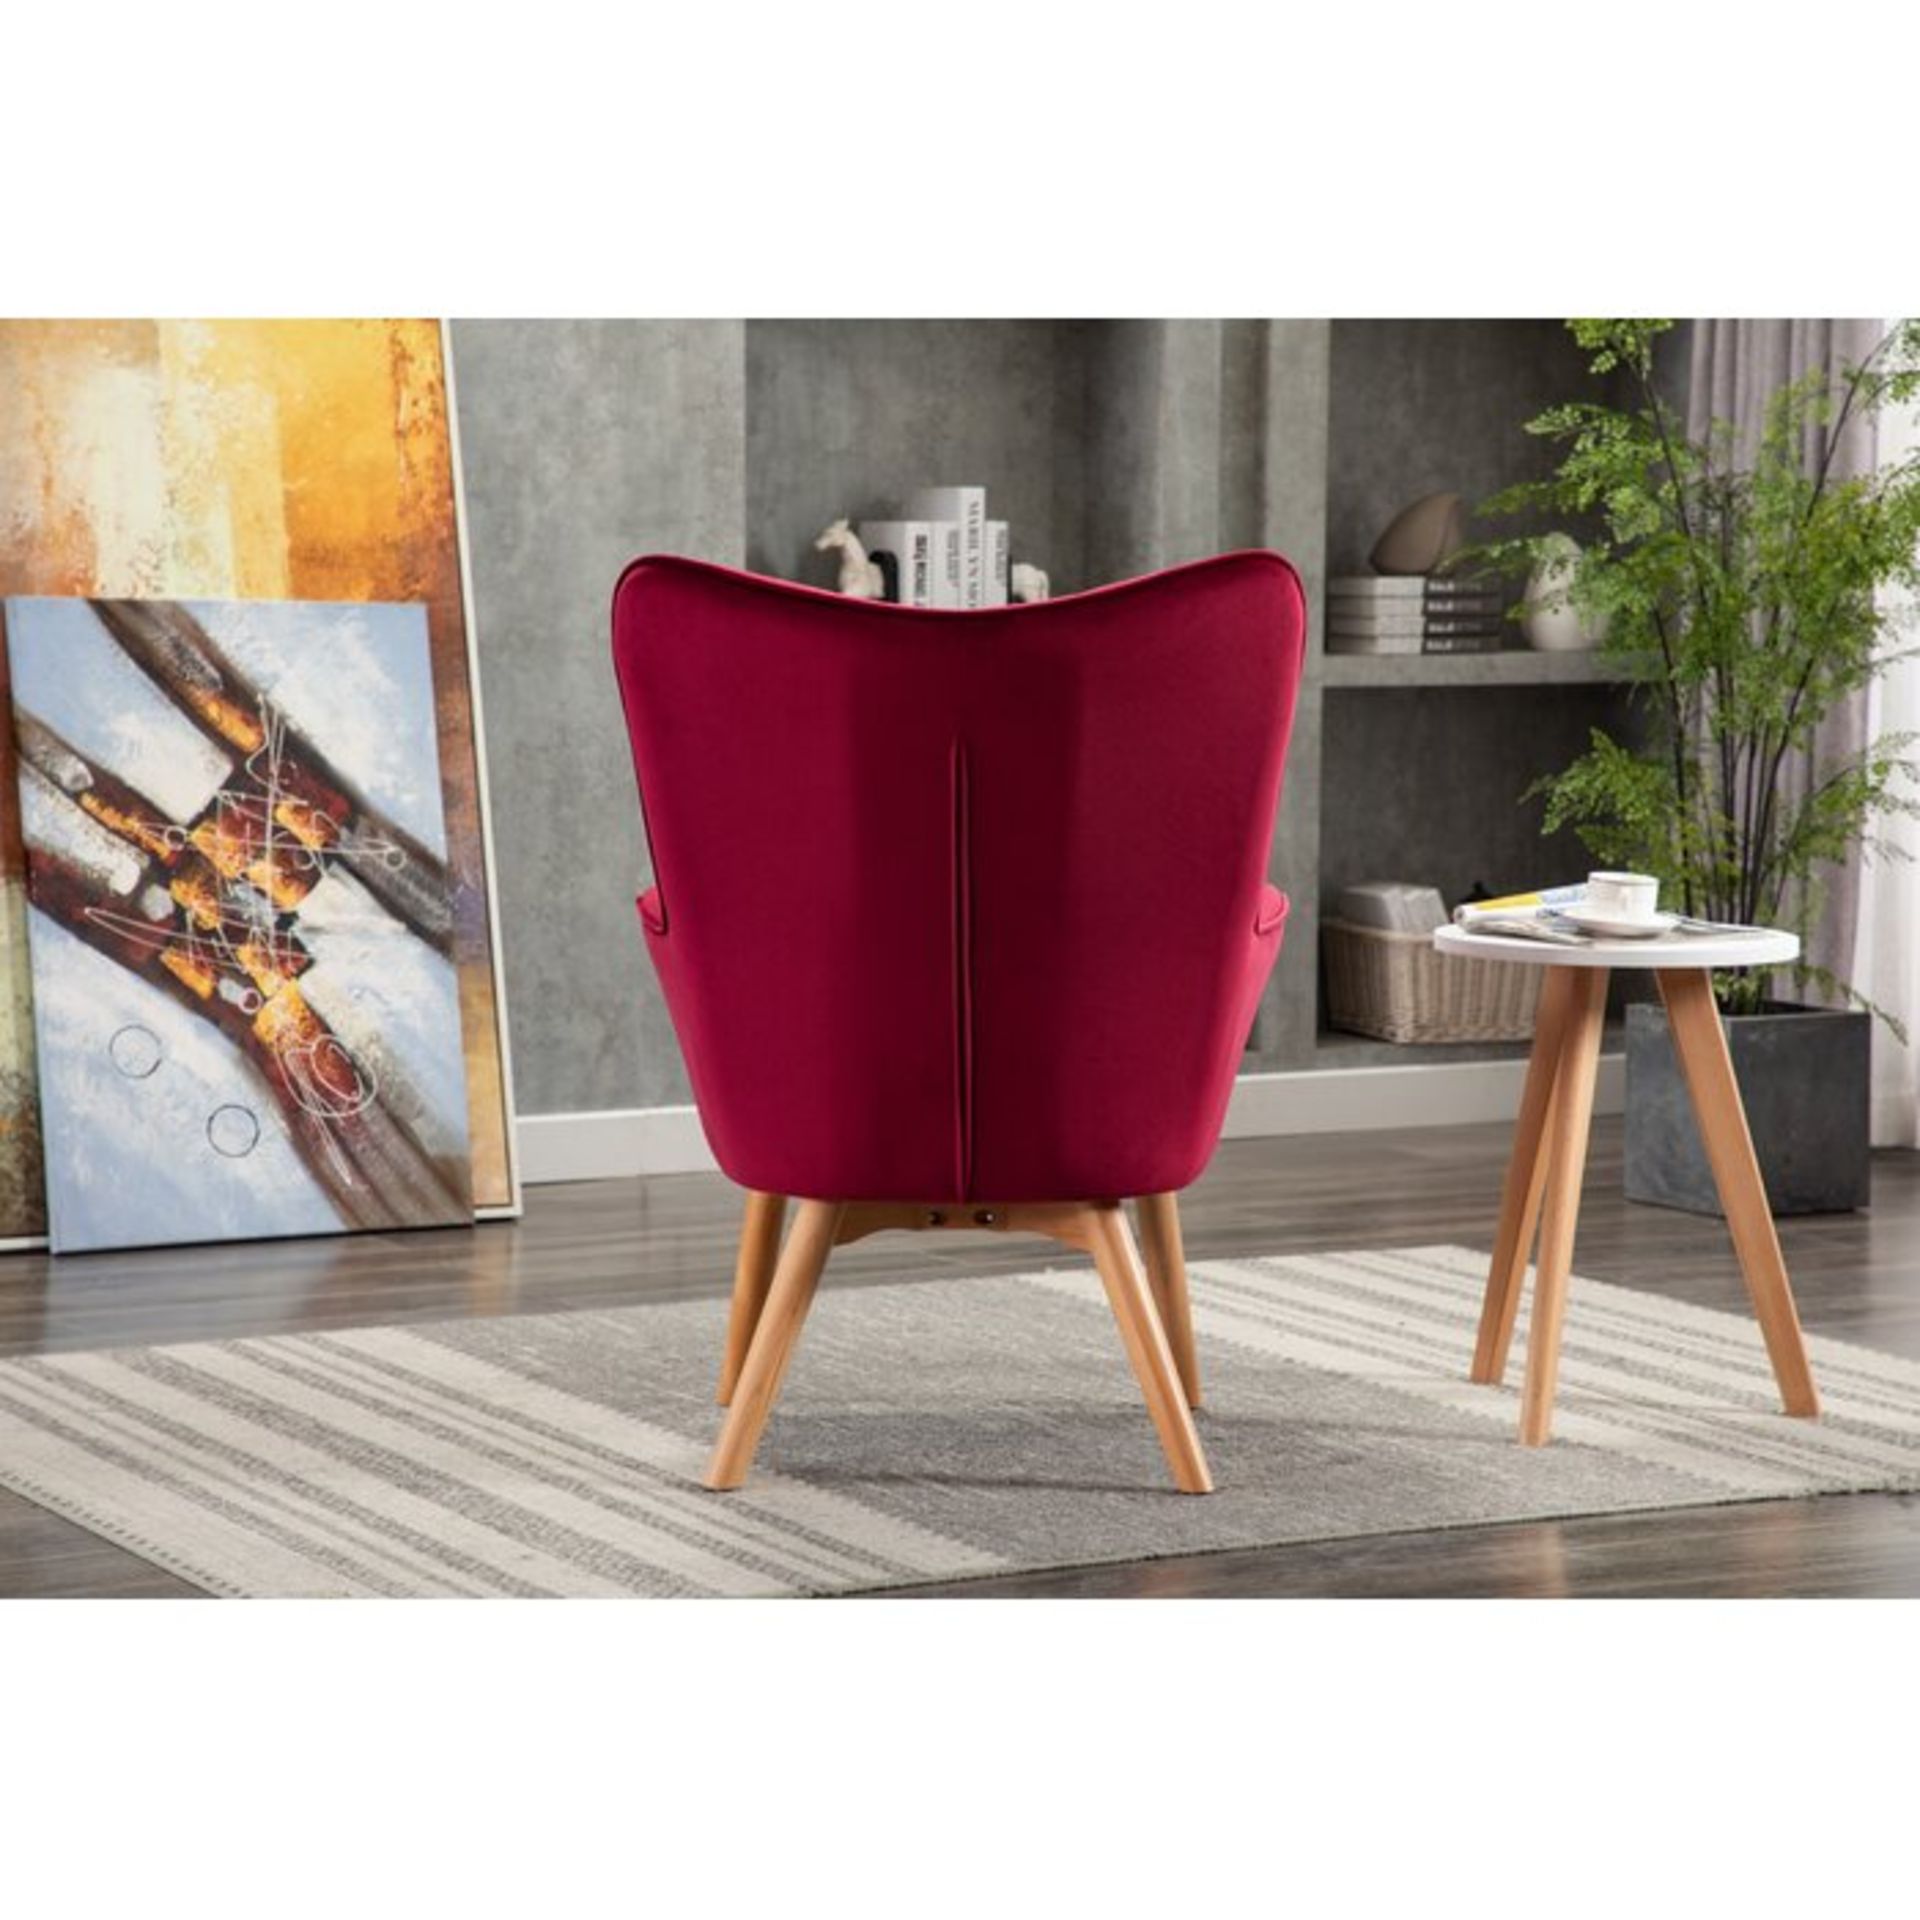 Helzer Lounge Chair - RRP £215.99 - Image 2 of 2